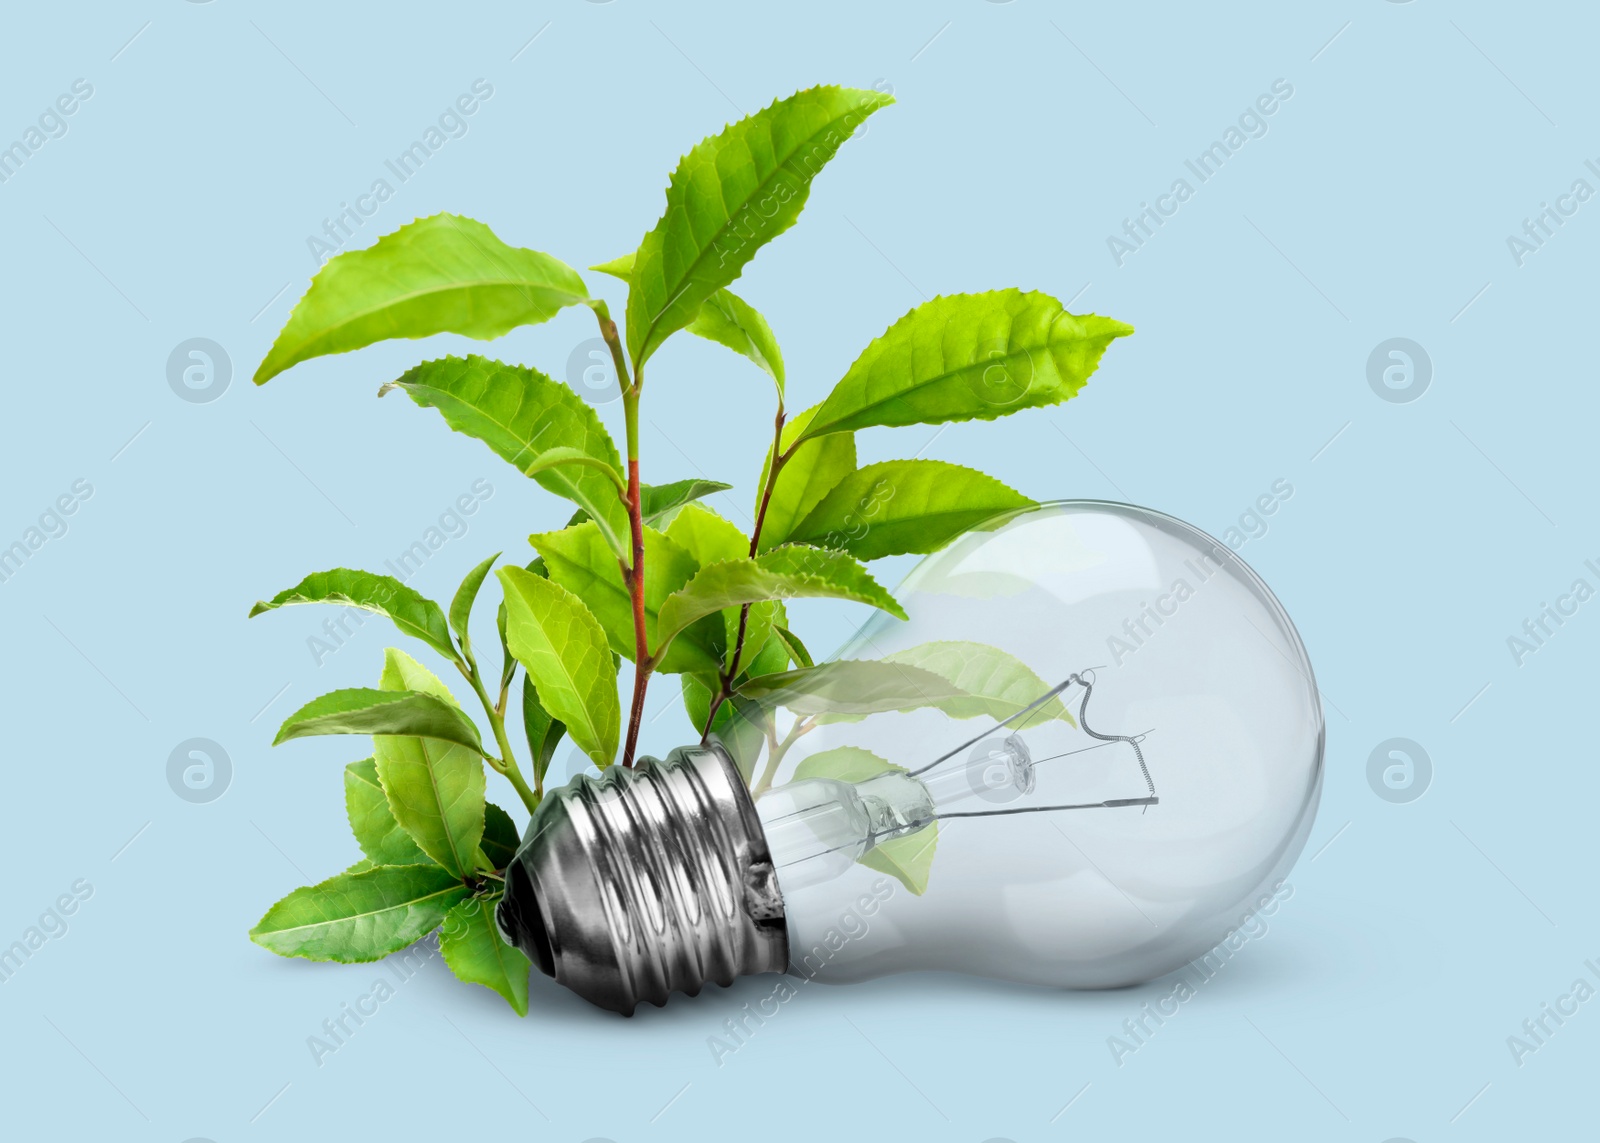 Image of Saving energy, eco-friendly lifestyle. Light bulb and fresh green leaves on light blue background